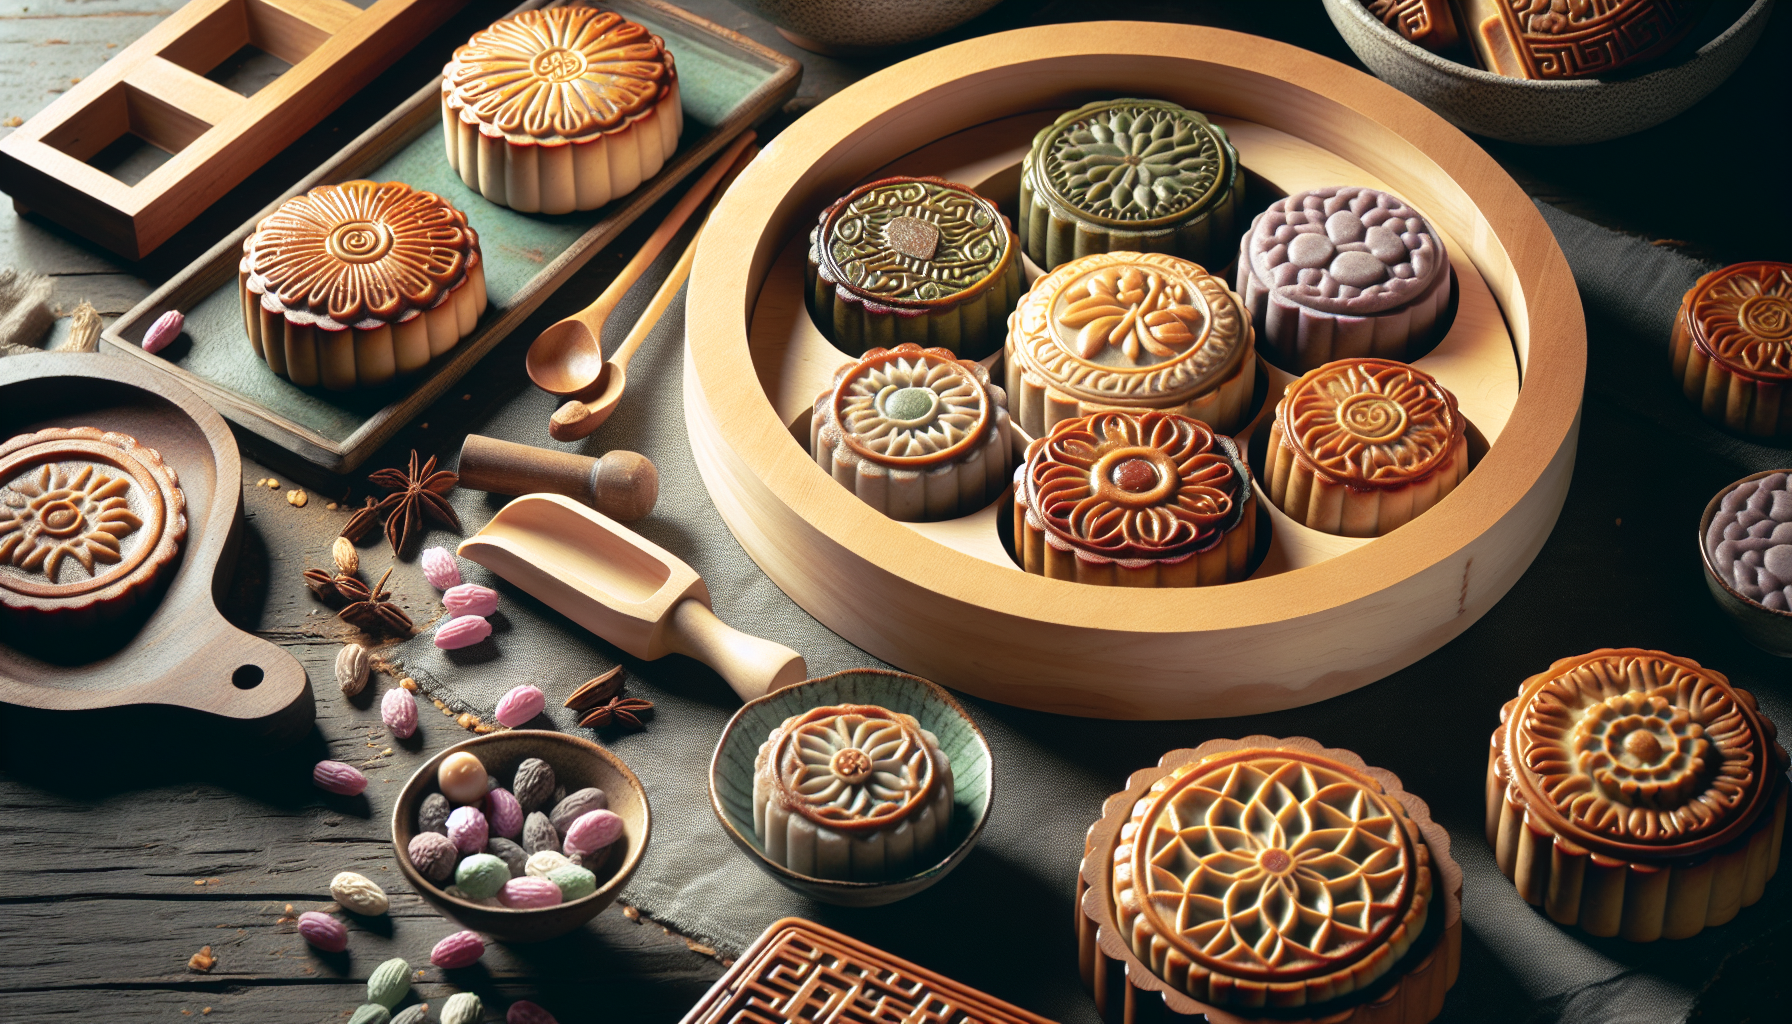 How Do You Make Mooncake At Home, And What Flavors Do You Incorporate?